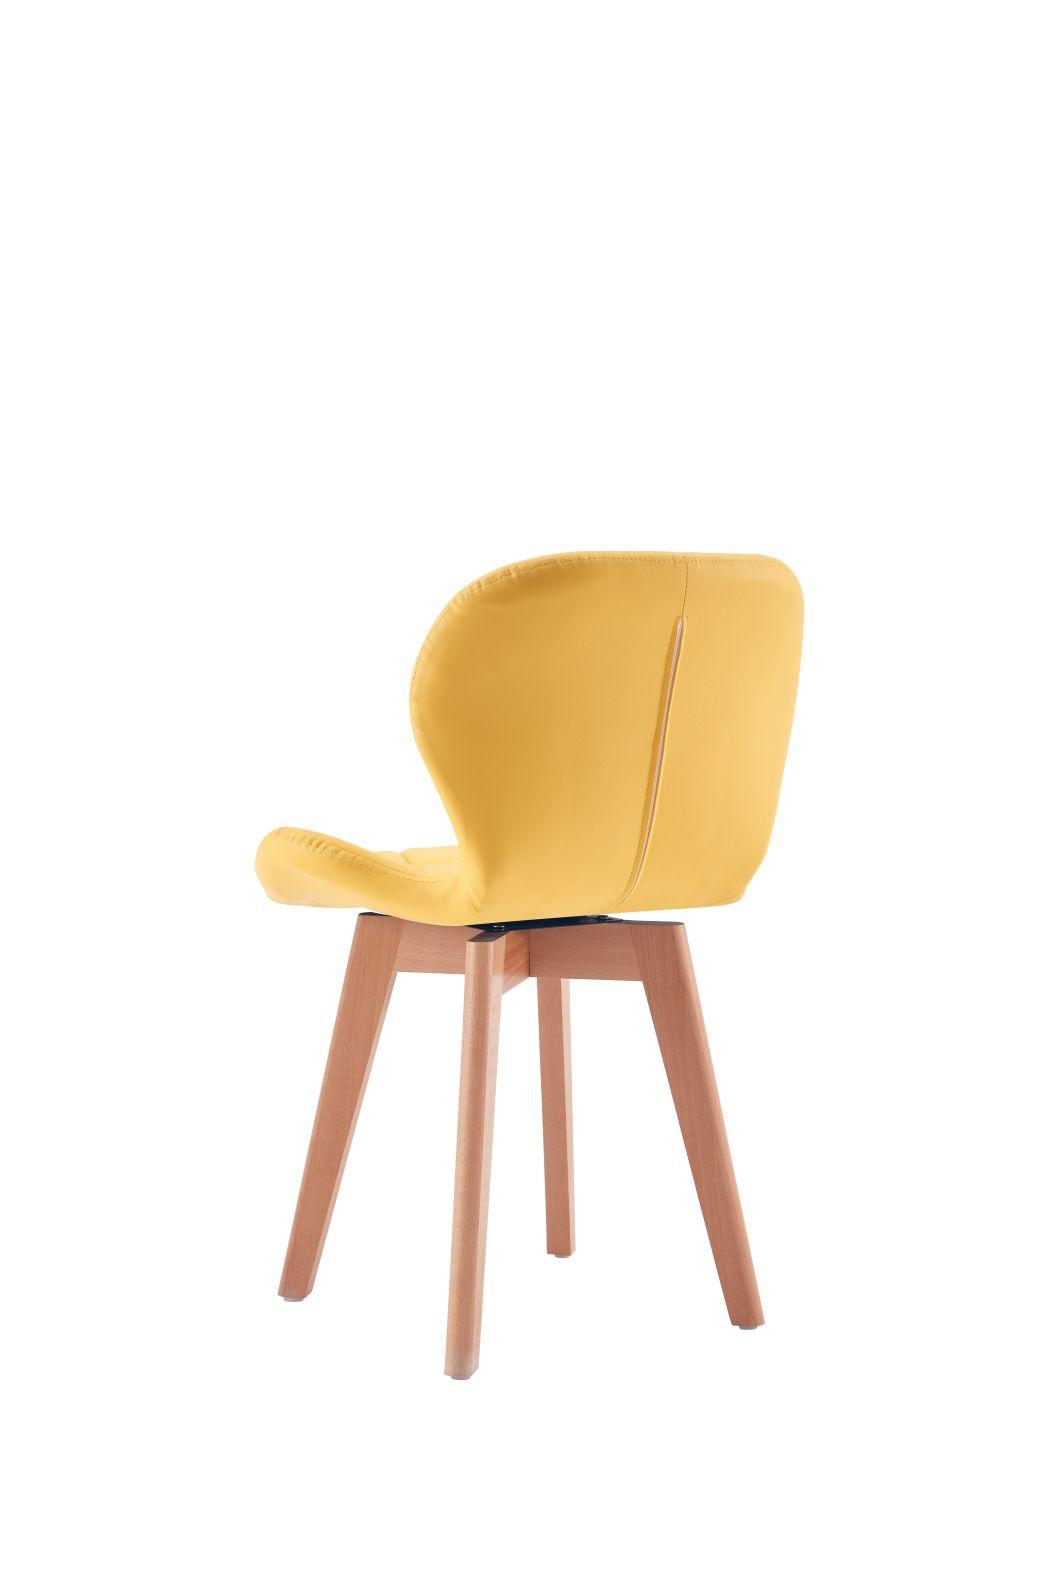 2021 Modern Design Cheap Home Furniture PU Leather Dining Room Chairs Beech Wood Legs Colorful Fabric Dining Chair